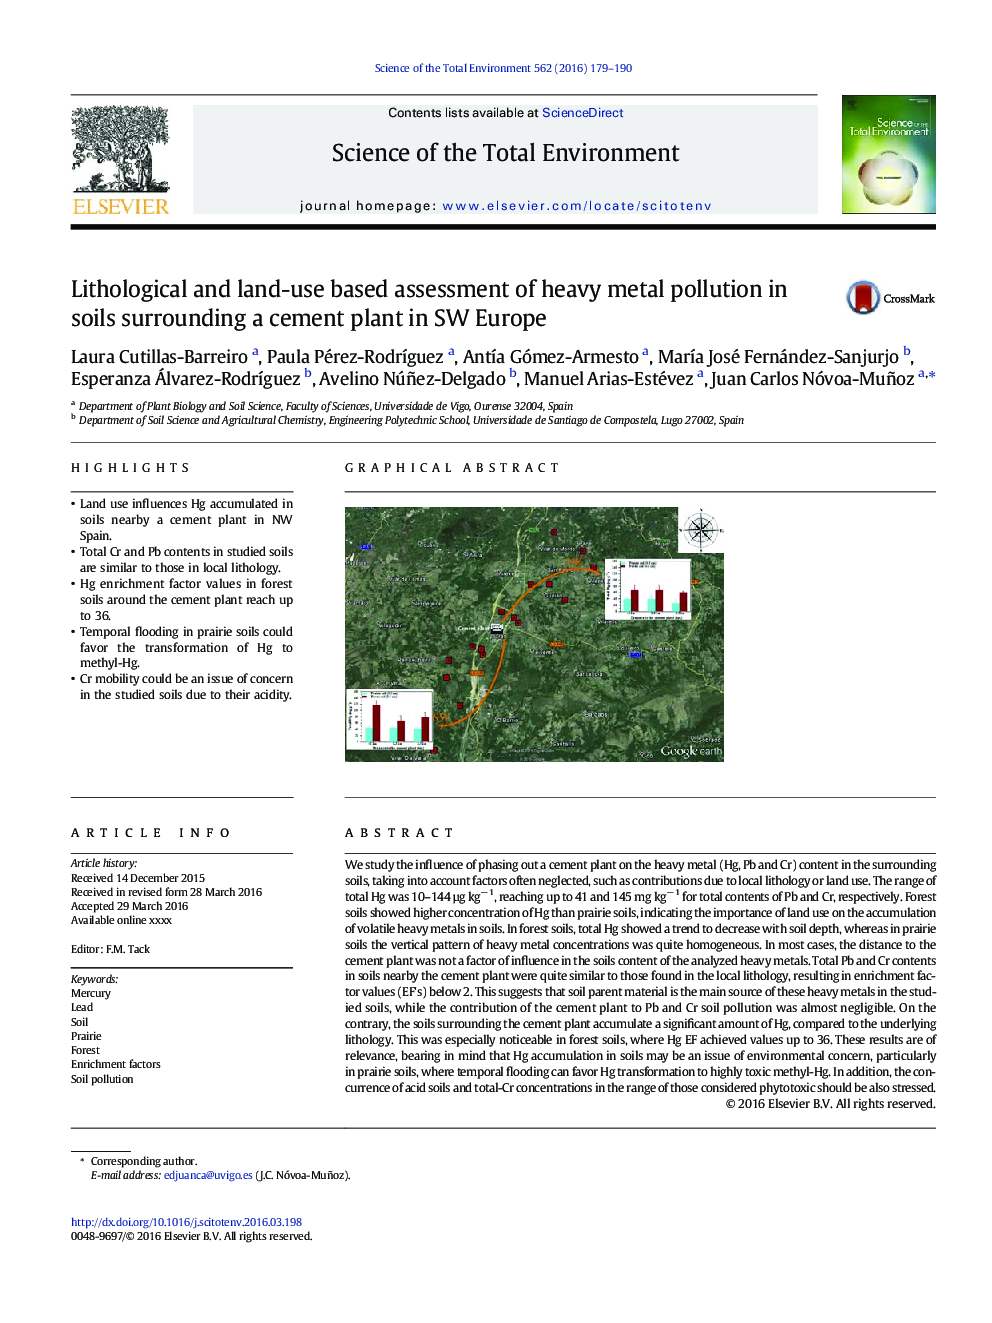 Lithological and land-use based assessment of heavy metal pollution in soils surrounding a cement plant in SW Europe